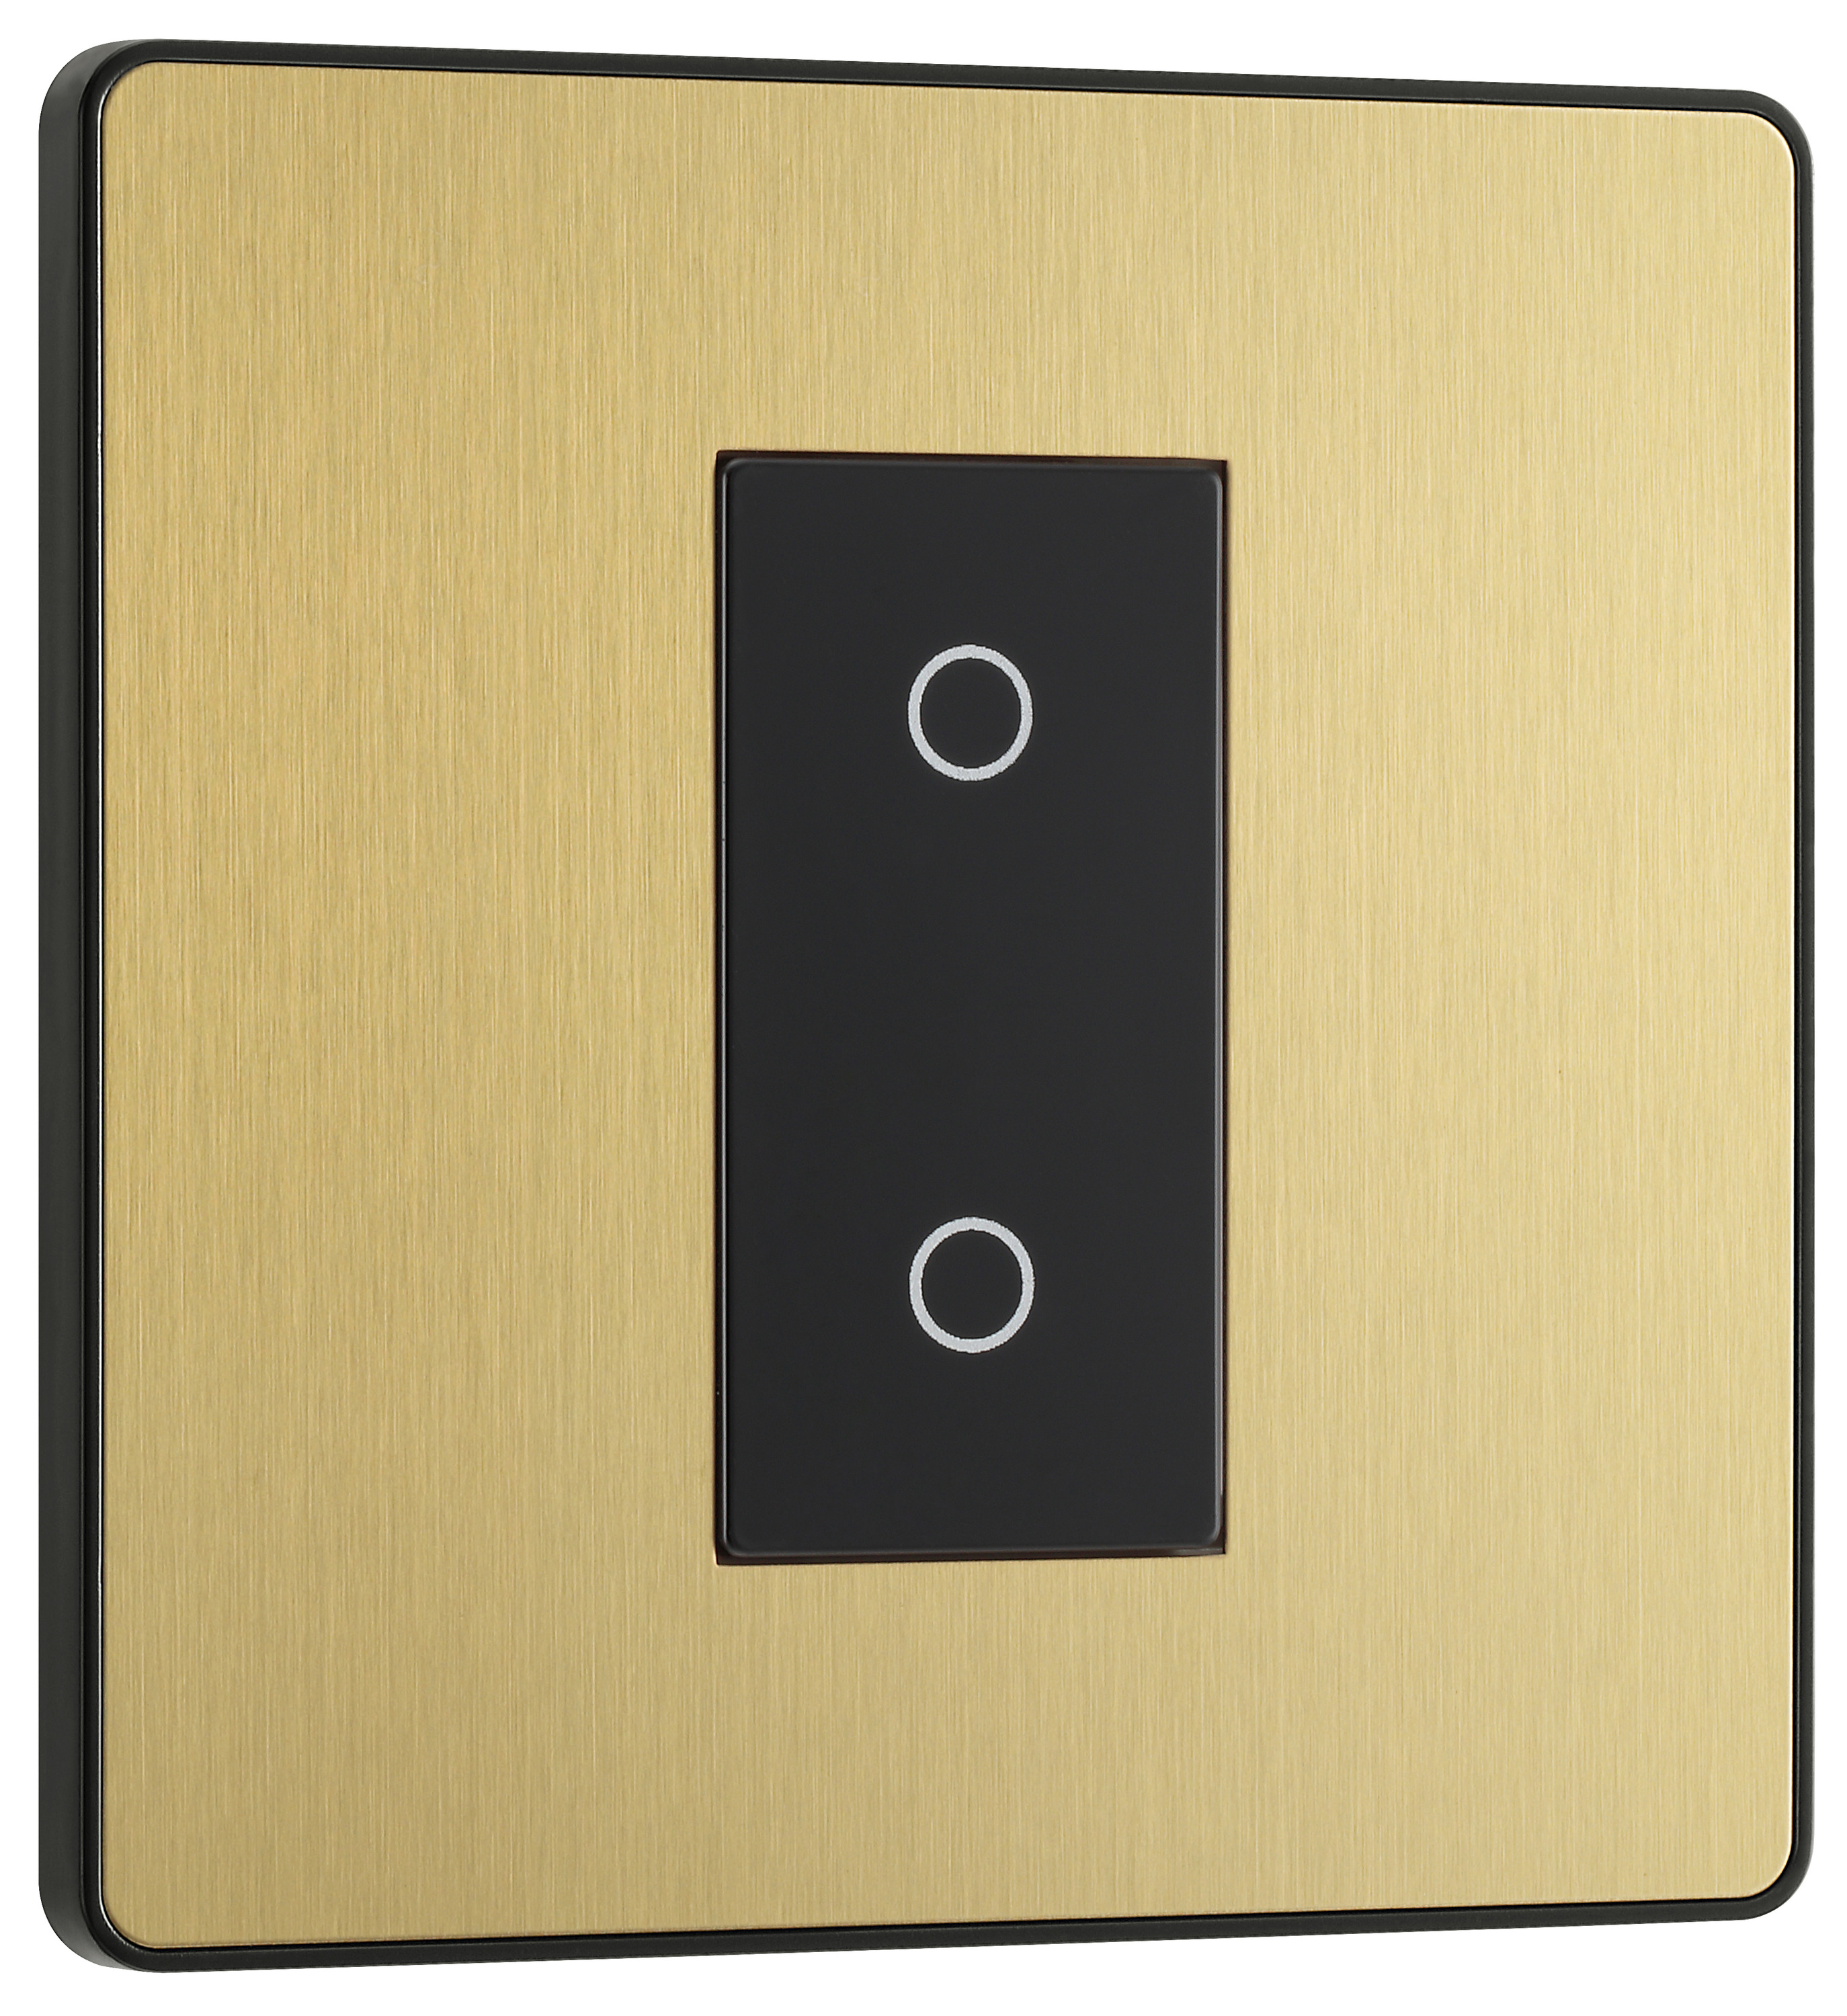 BG Evolve Master Brushed Brass 2 Way Single Touch Dimmer Switch - 200W